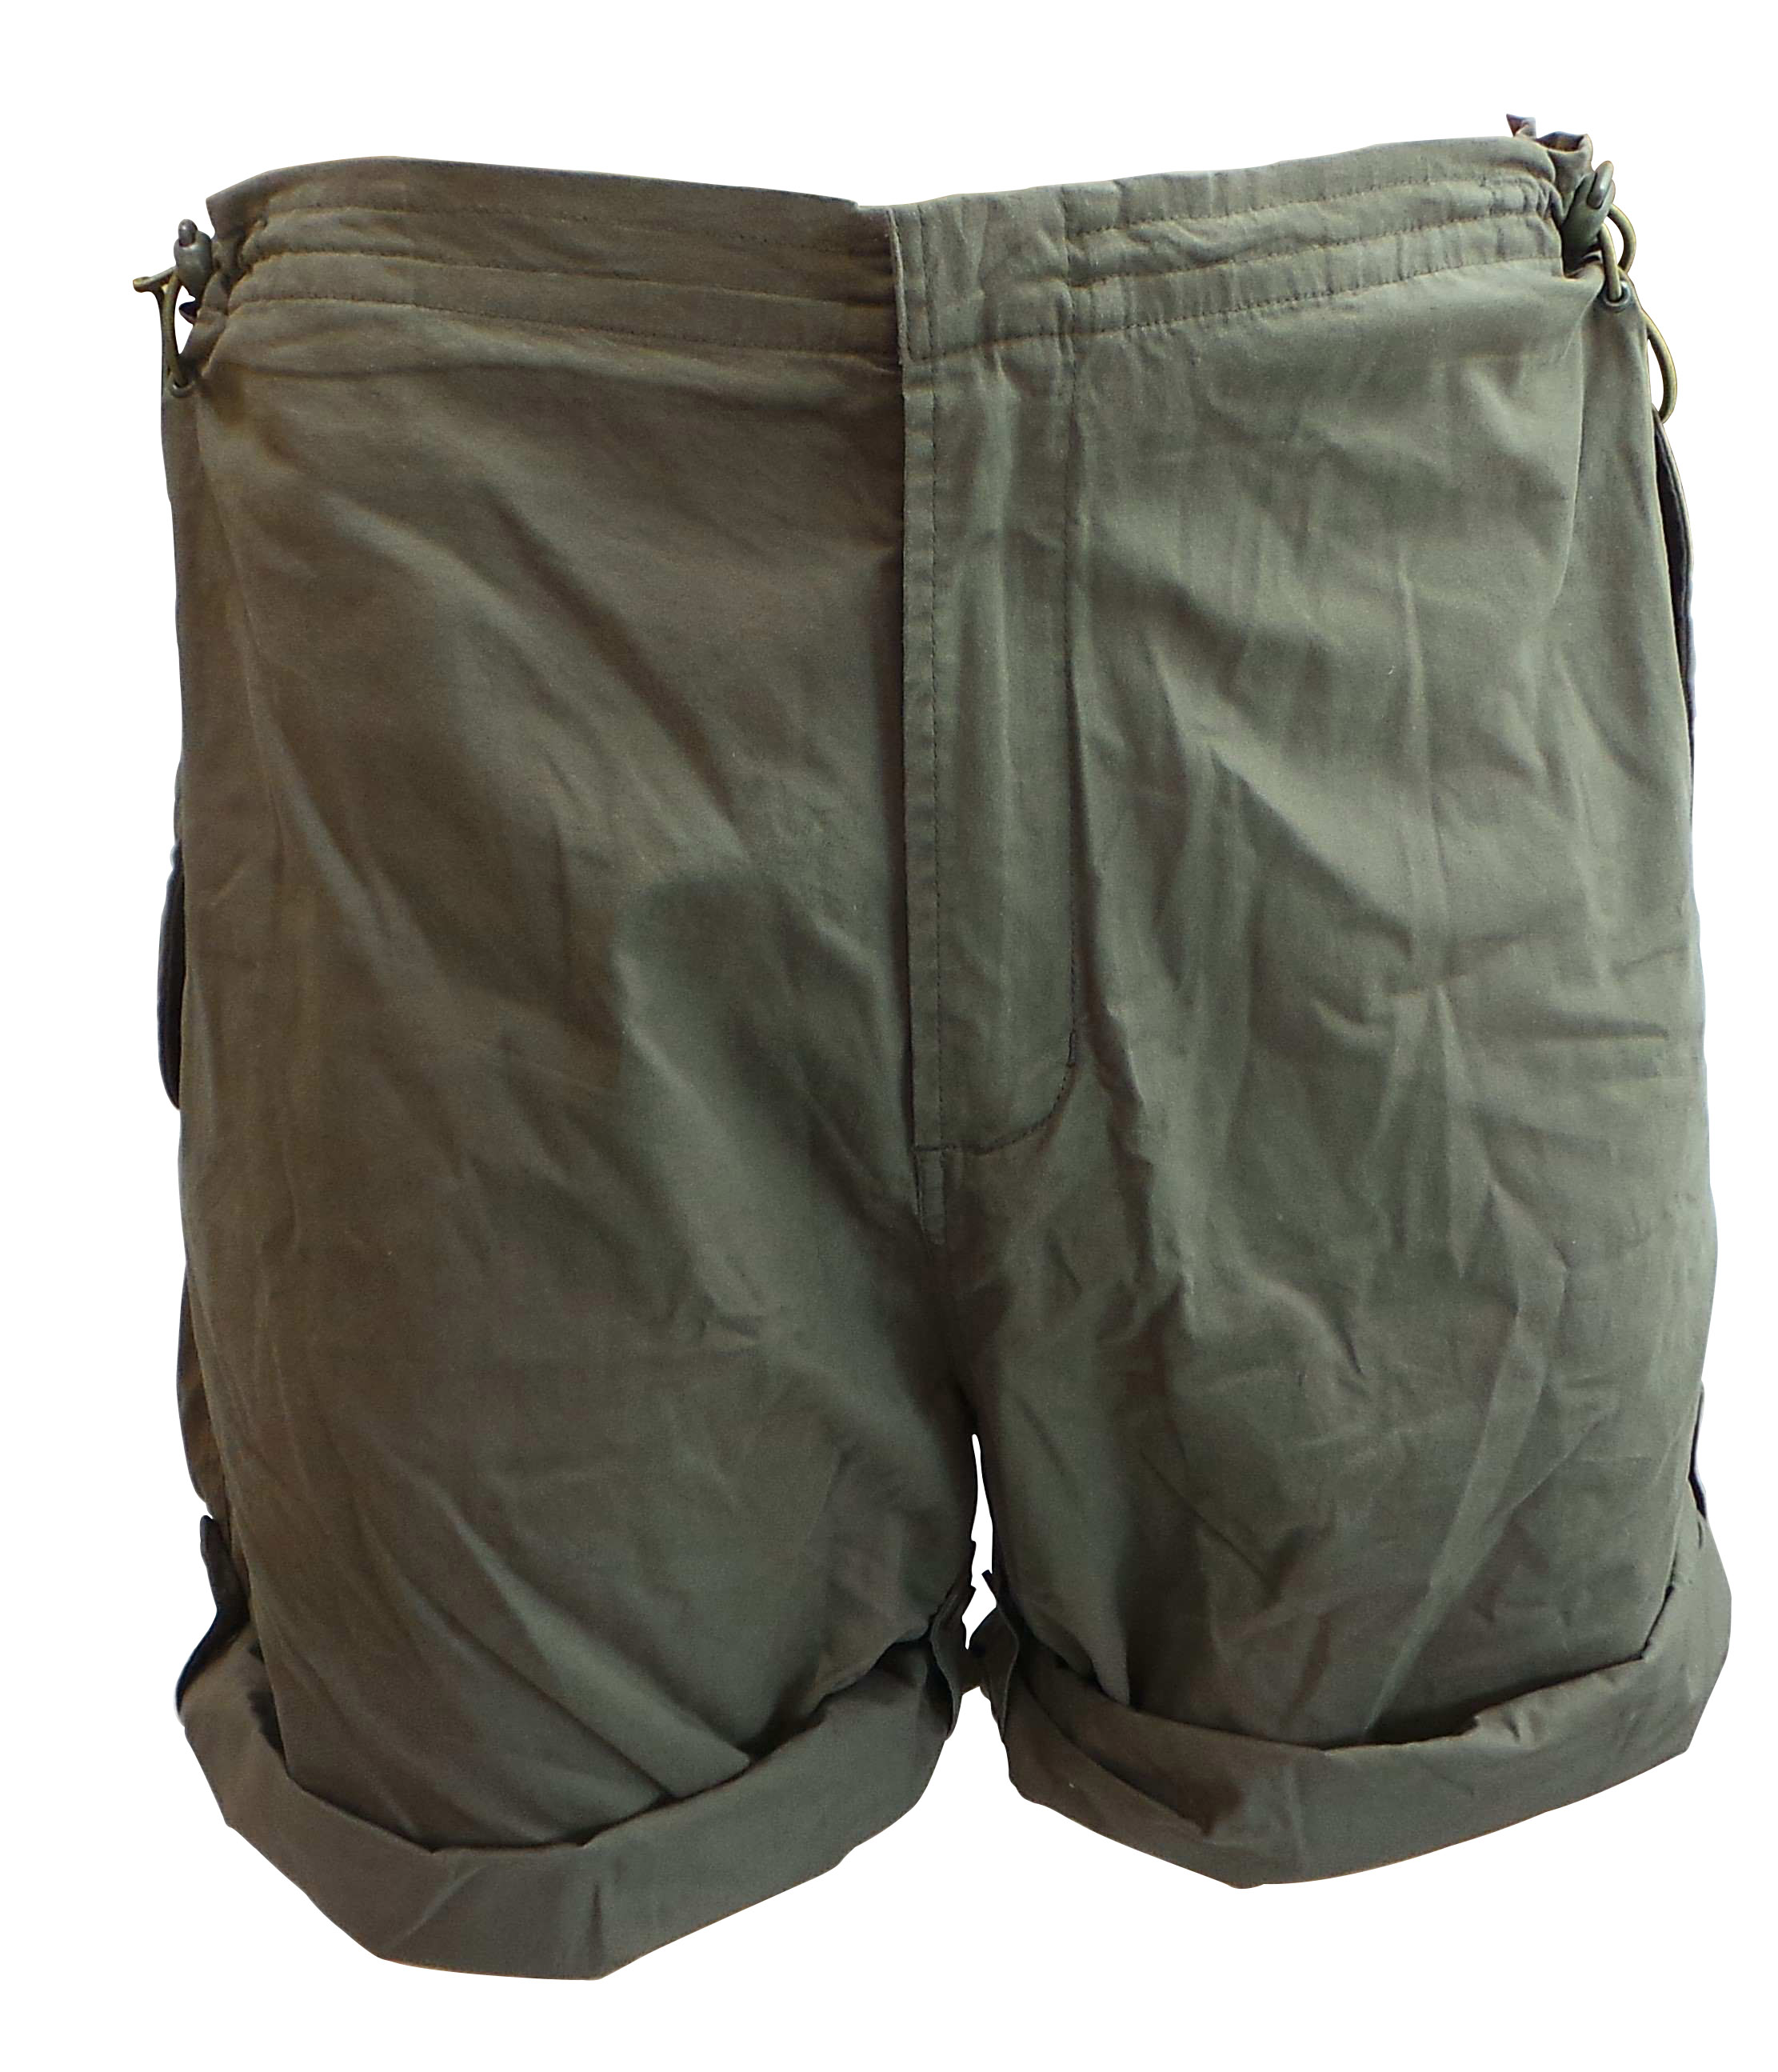 MENS OLIVE shorts - Forest Army Surplus - Military & Outdoors Clothing ...